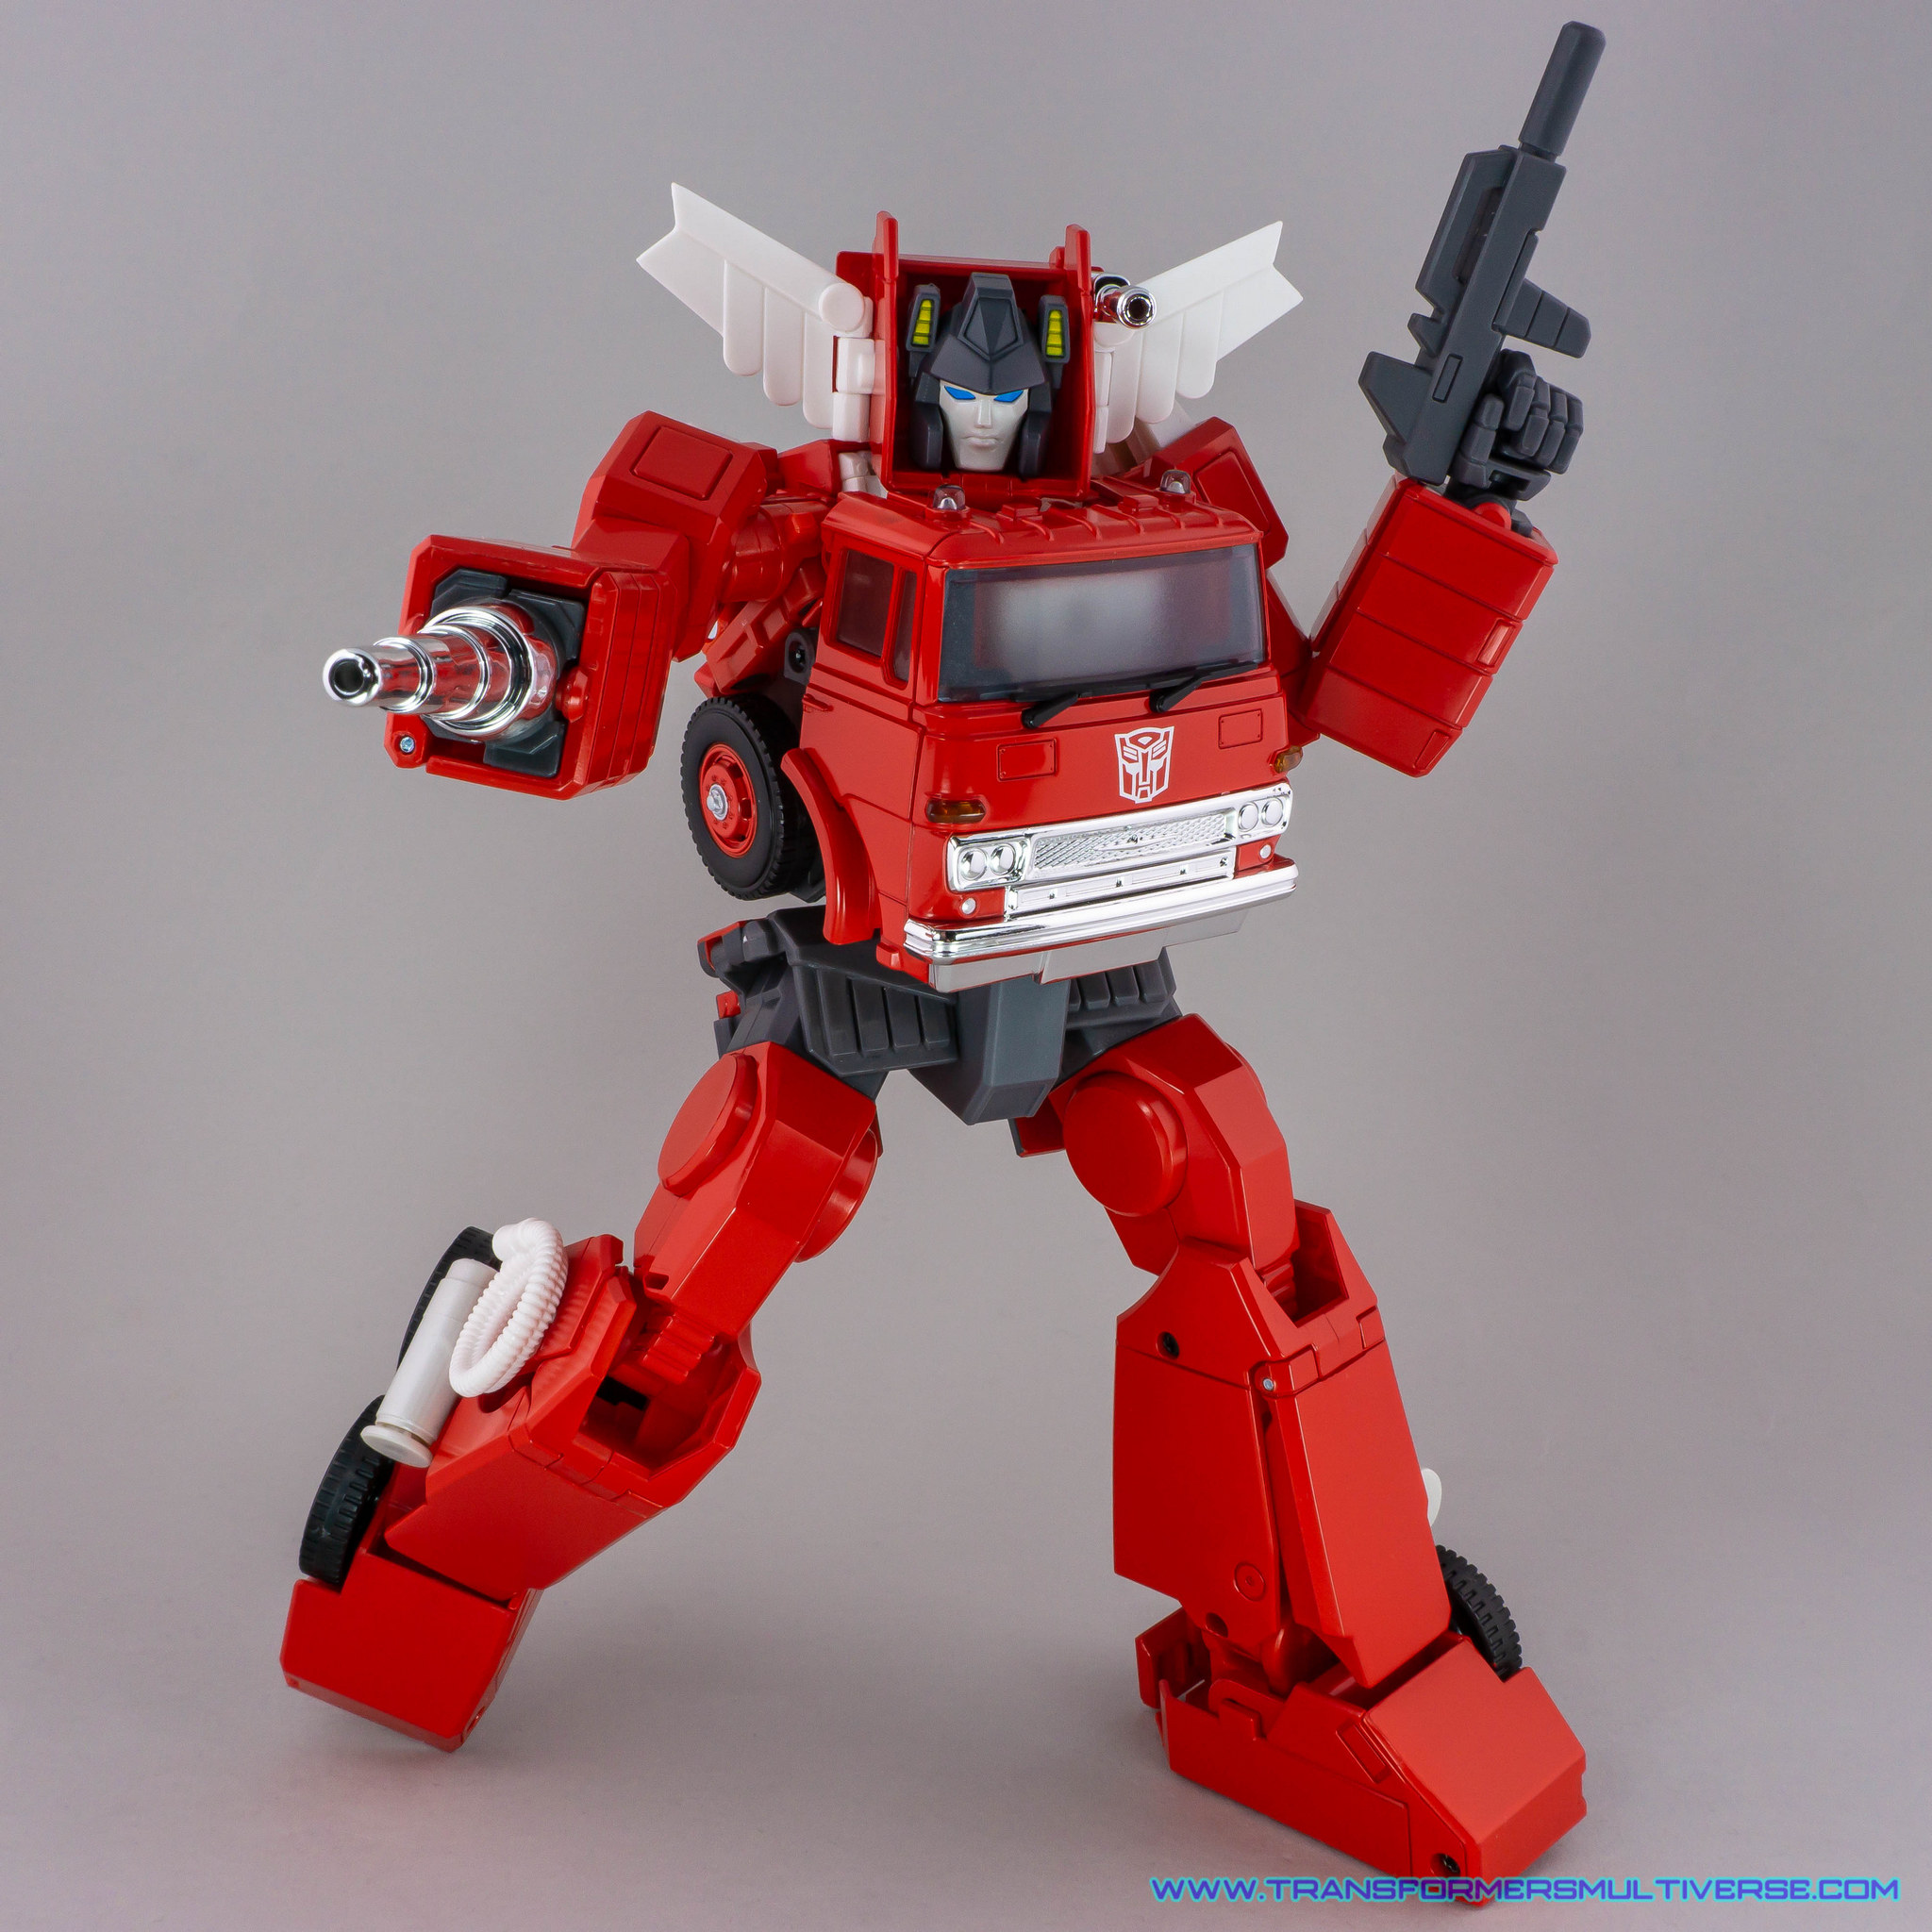 Transformers Masterpiece Inferno robot mode posed